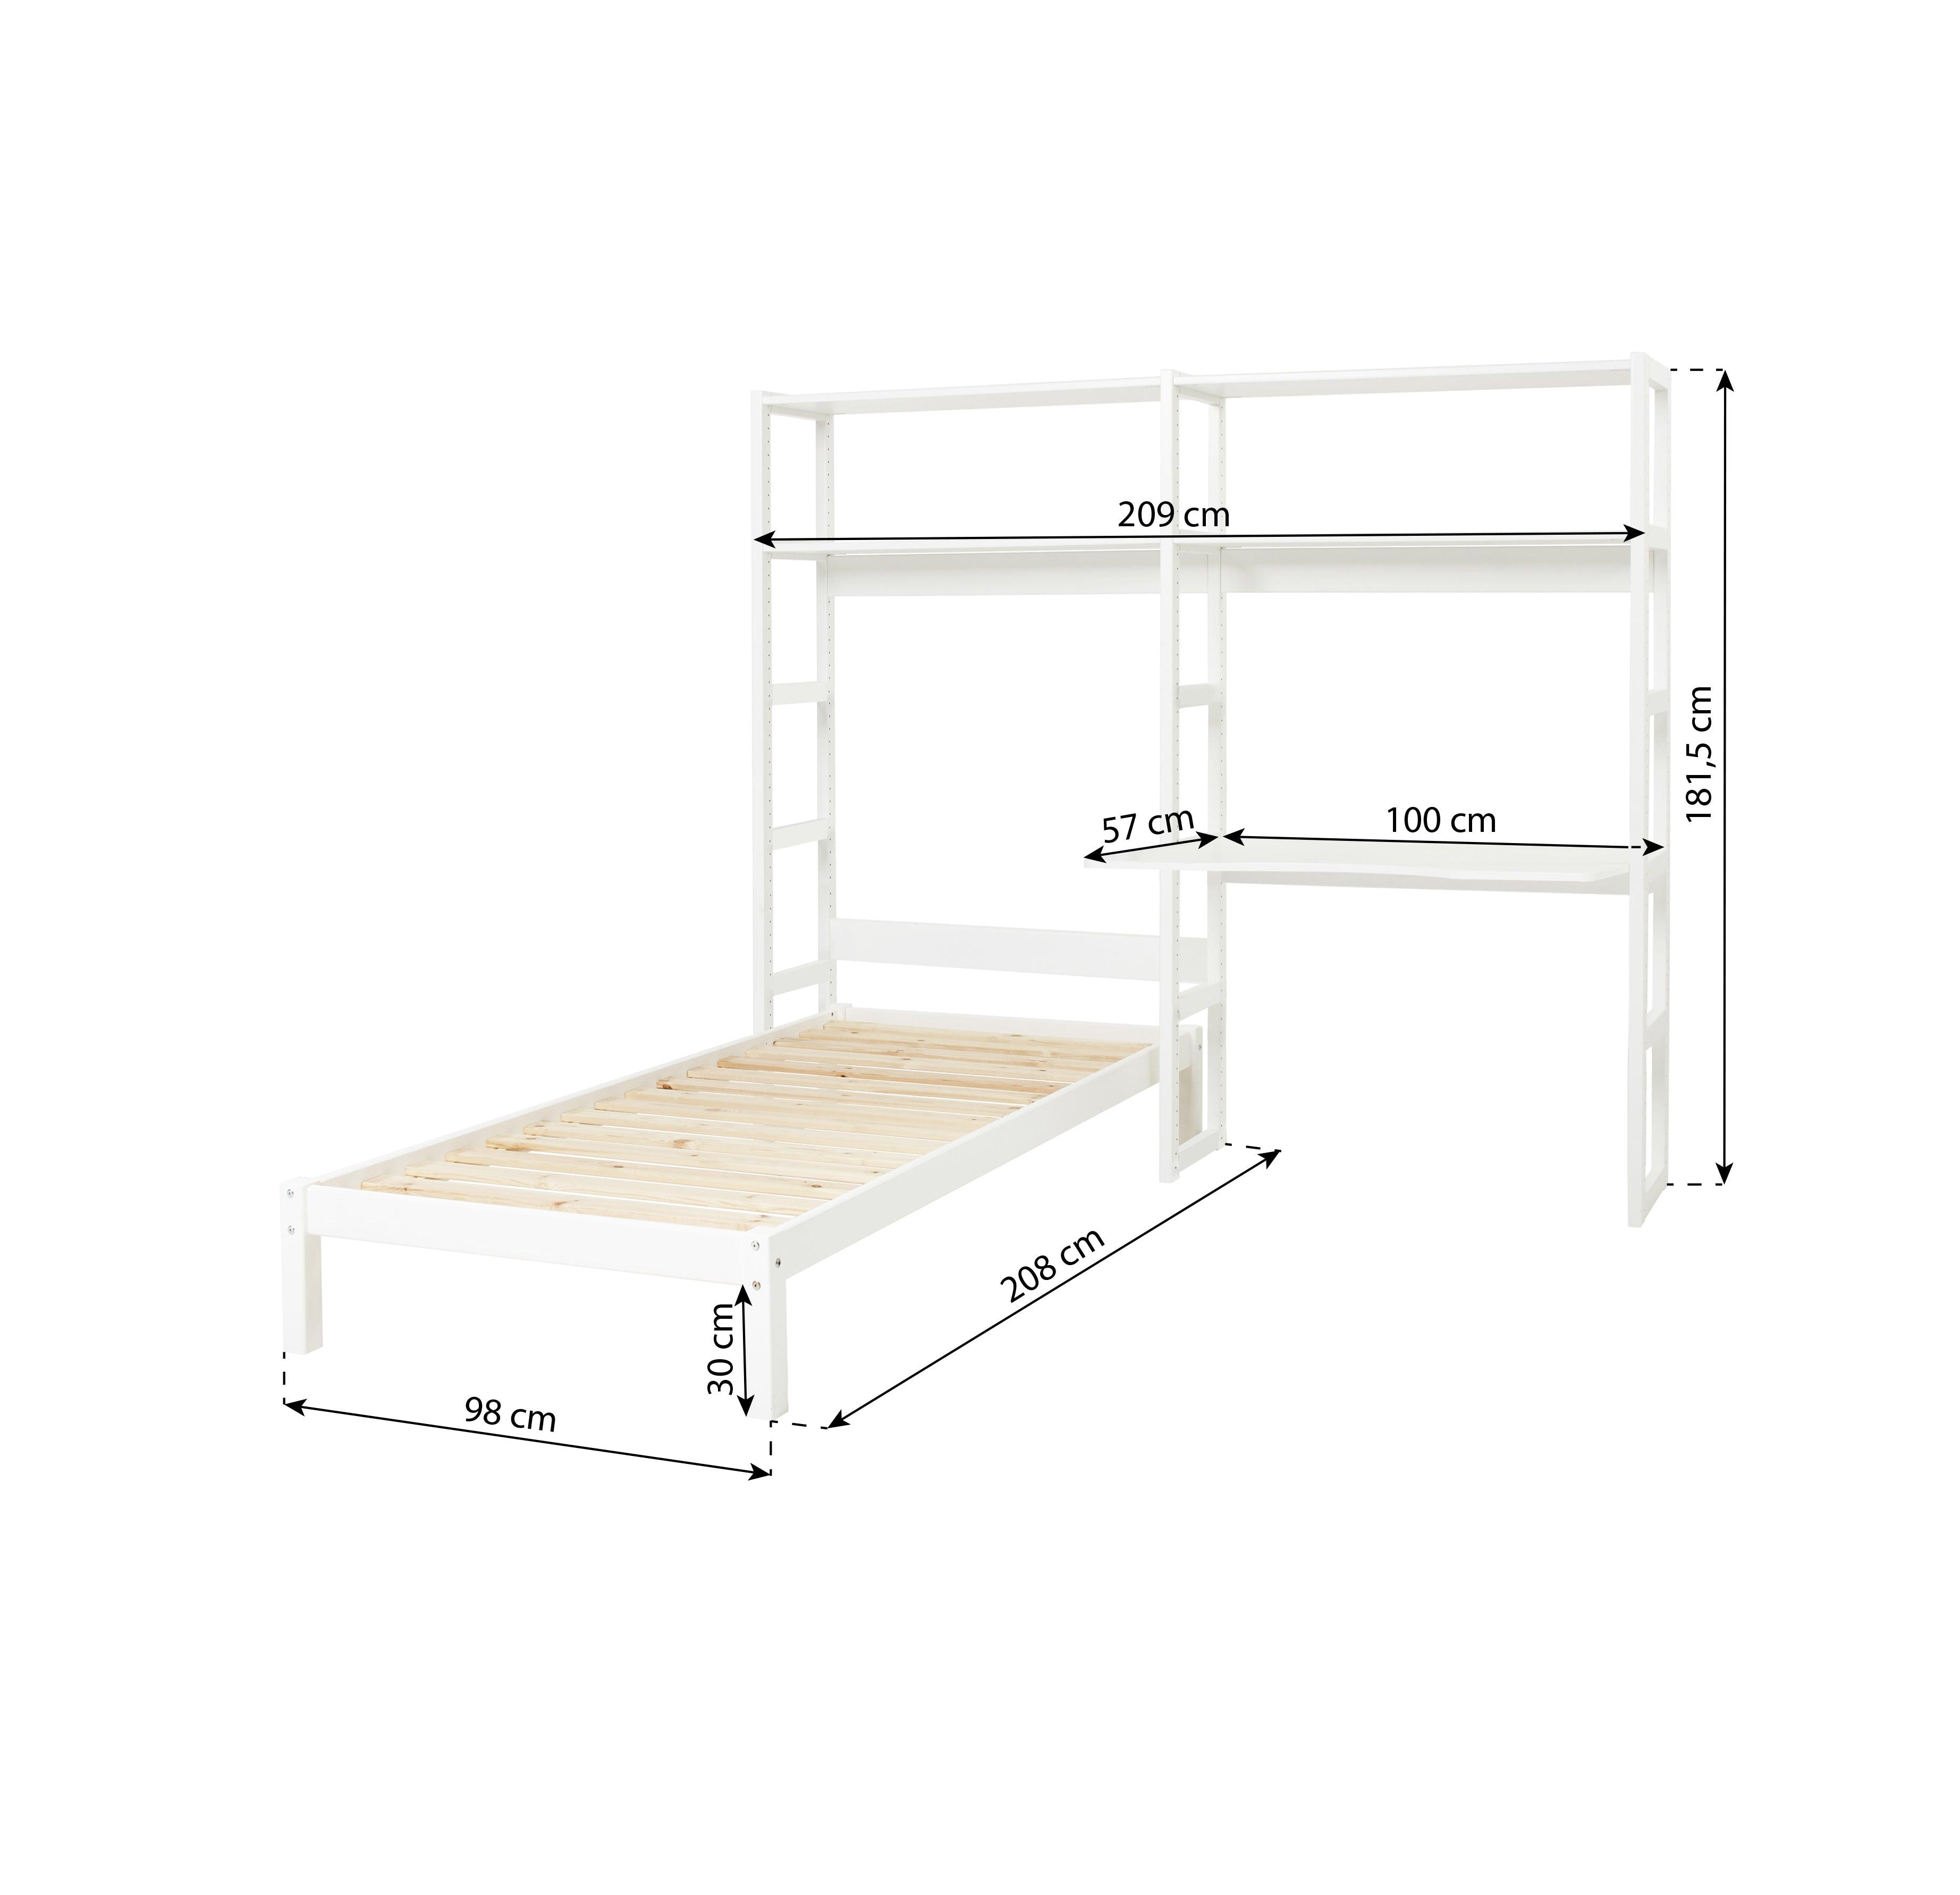 Hoppekids STOREY shelf with 2 sections, 4 shelves, bed in 70x160 cm, and writing desk in 80 cm, White